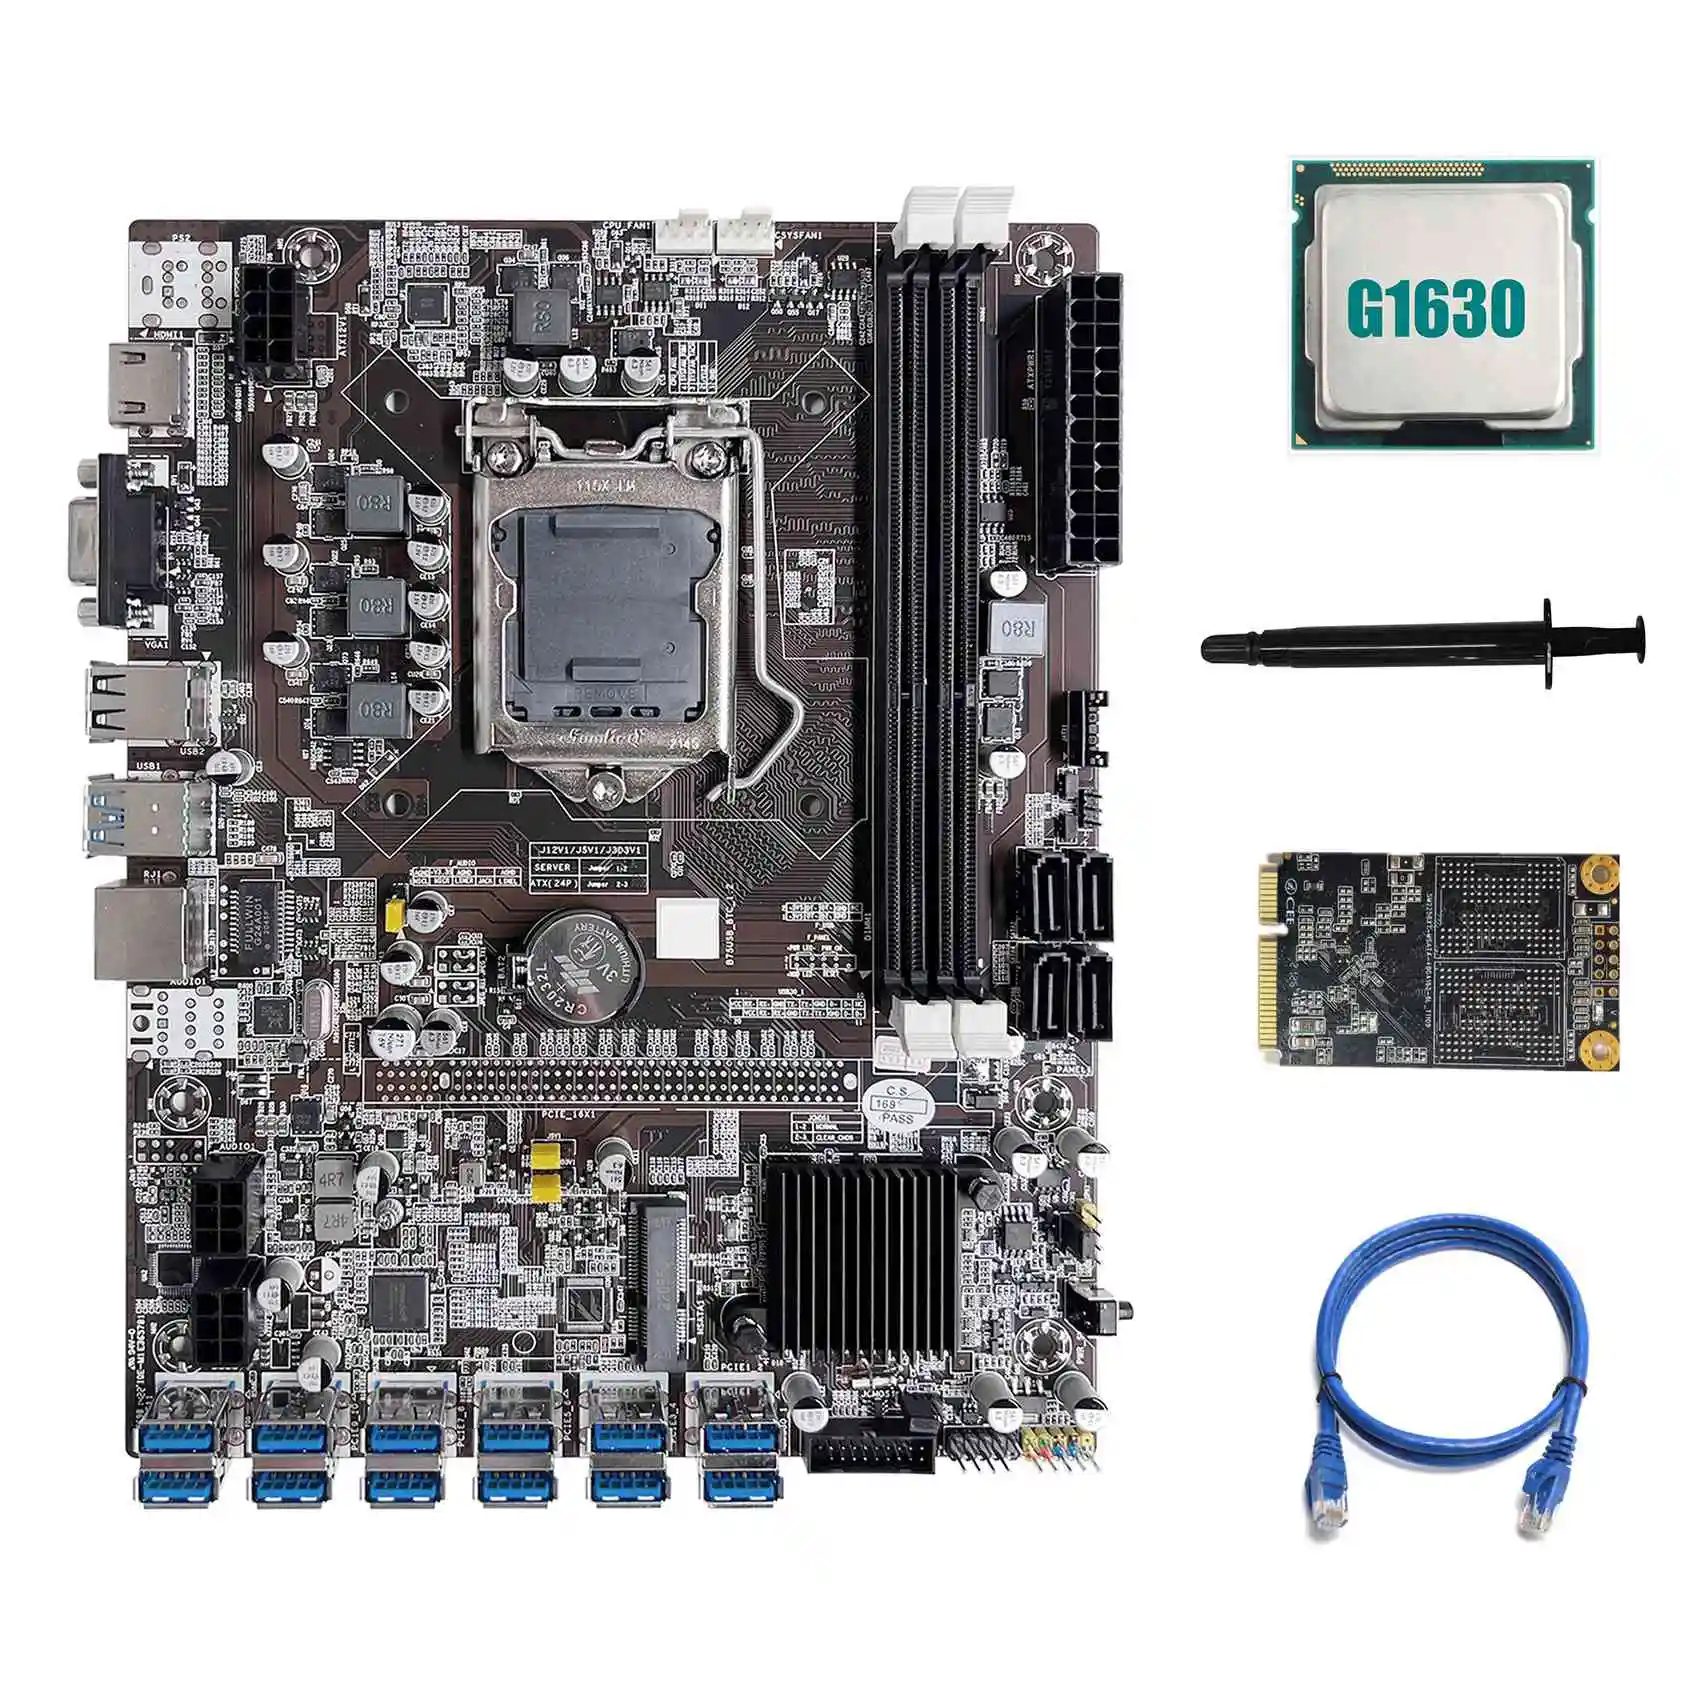 

B75 ETH Mining Motherboard 12 PCIE to USB LGA1155 with G1630 CPU+MSATA SSD 64G+Thermal Grease+RJ45 Network Cable